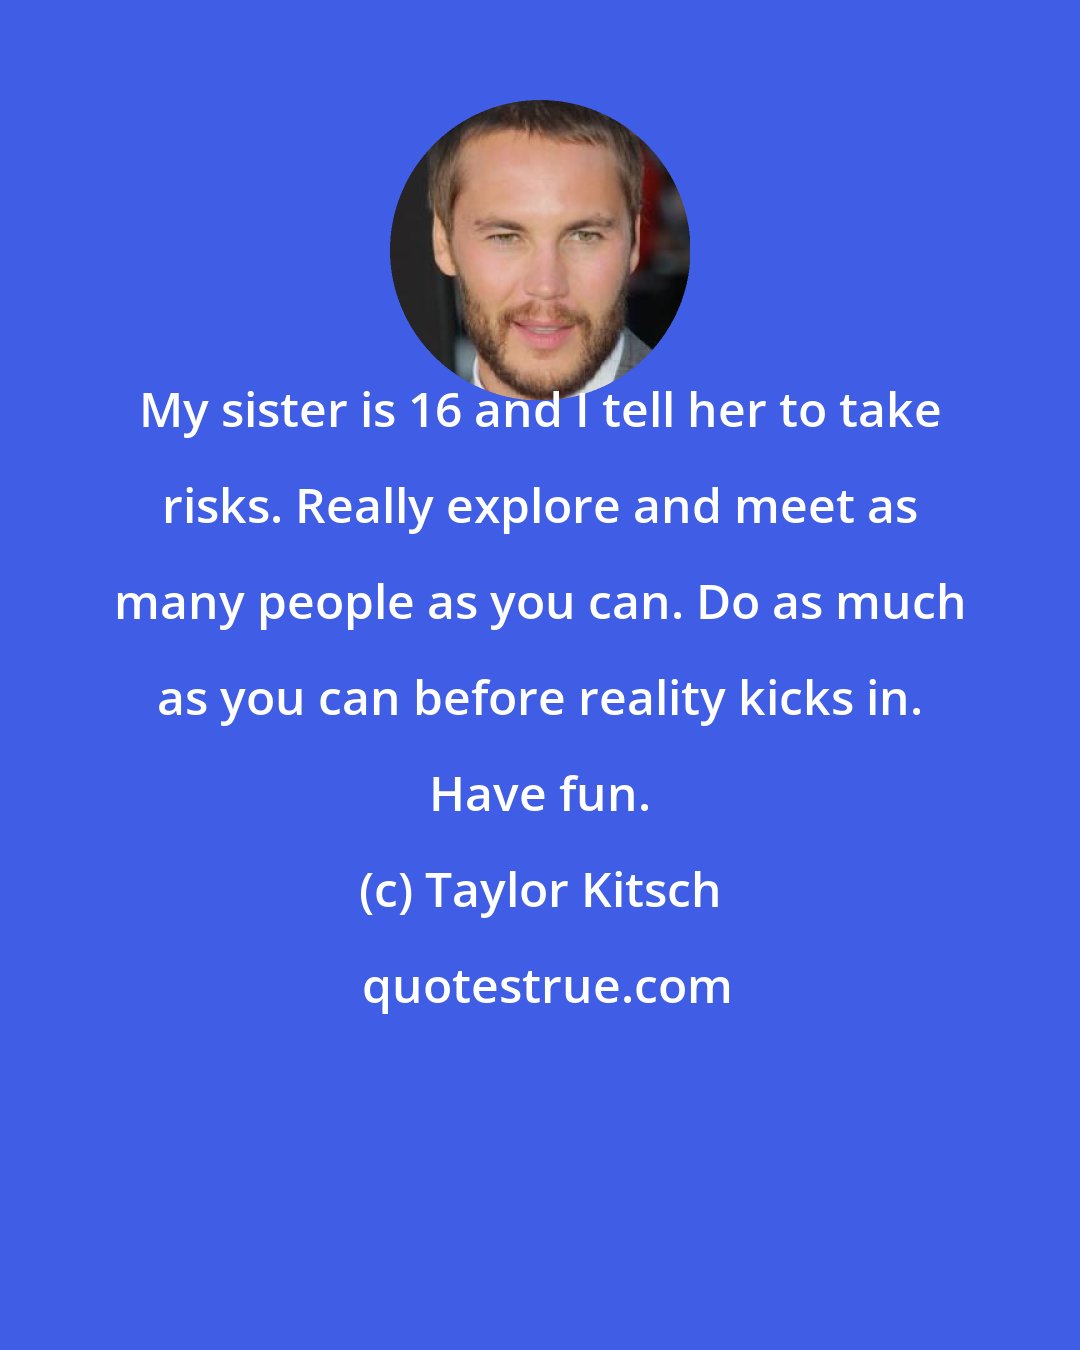 Taylor Kitsch: My sister is 16 and I tell her to take risks. Really explore and meet as many people as you can. Do as much as you can before reality kicks in. Have fun.